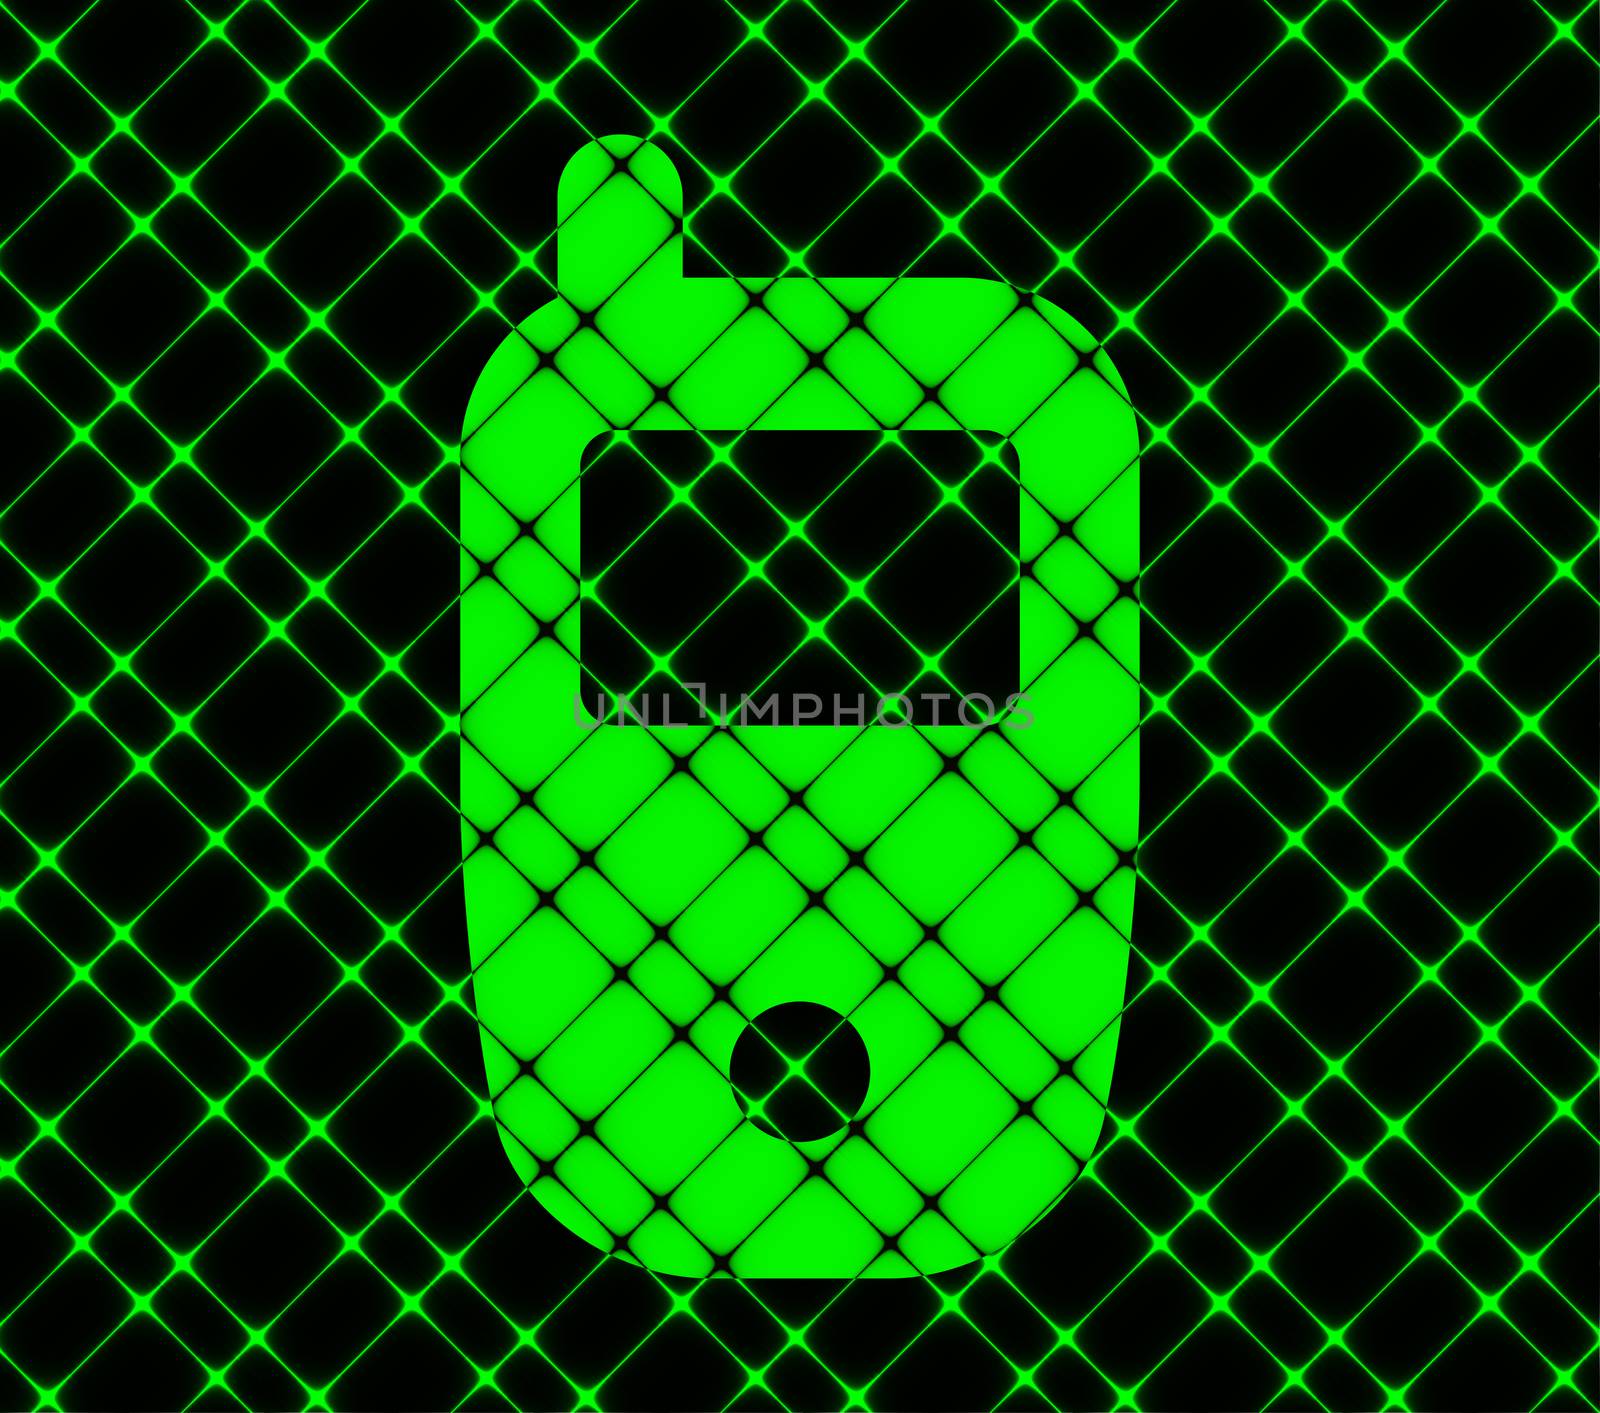 Mobile phone icon flat design with abstract background.